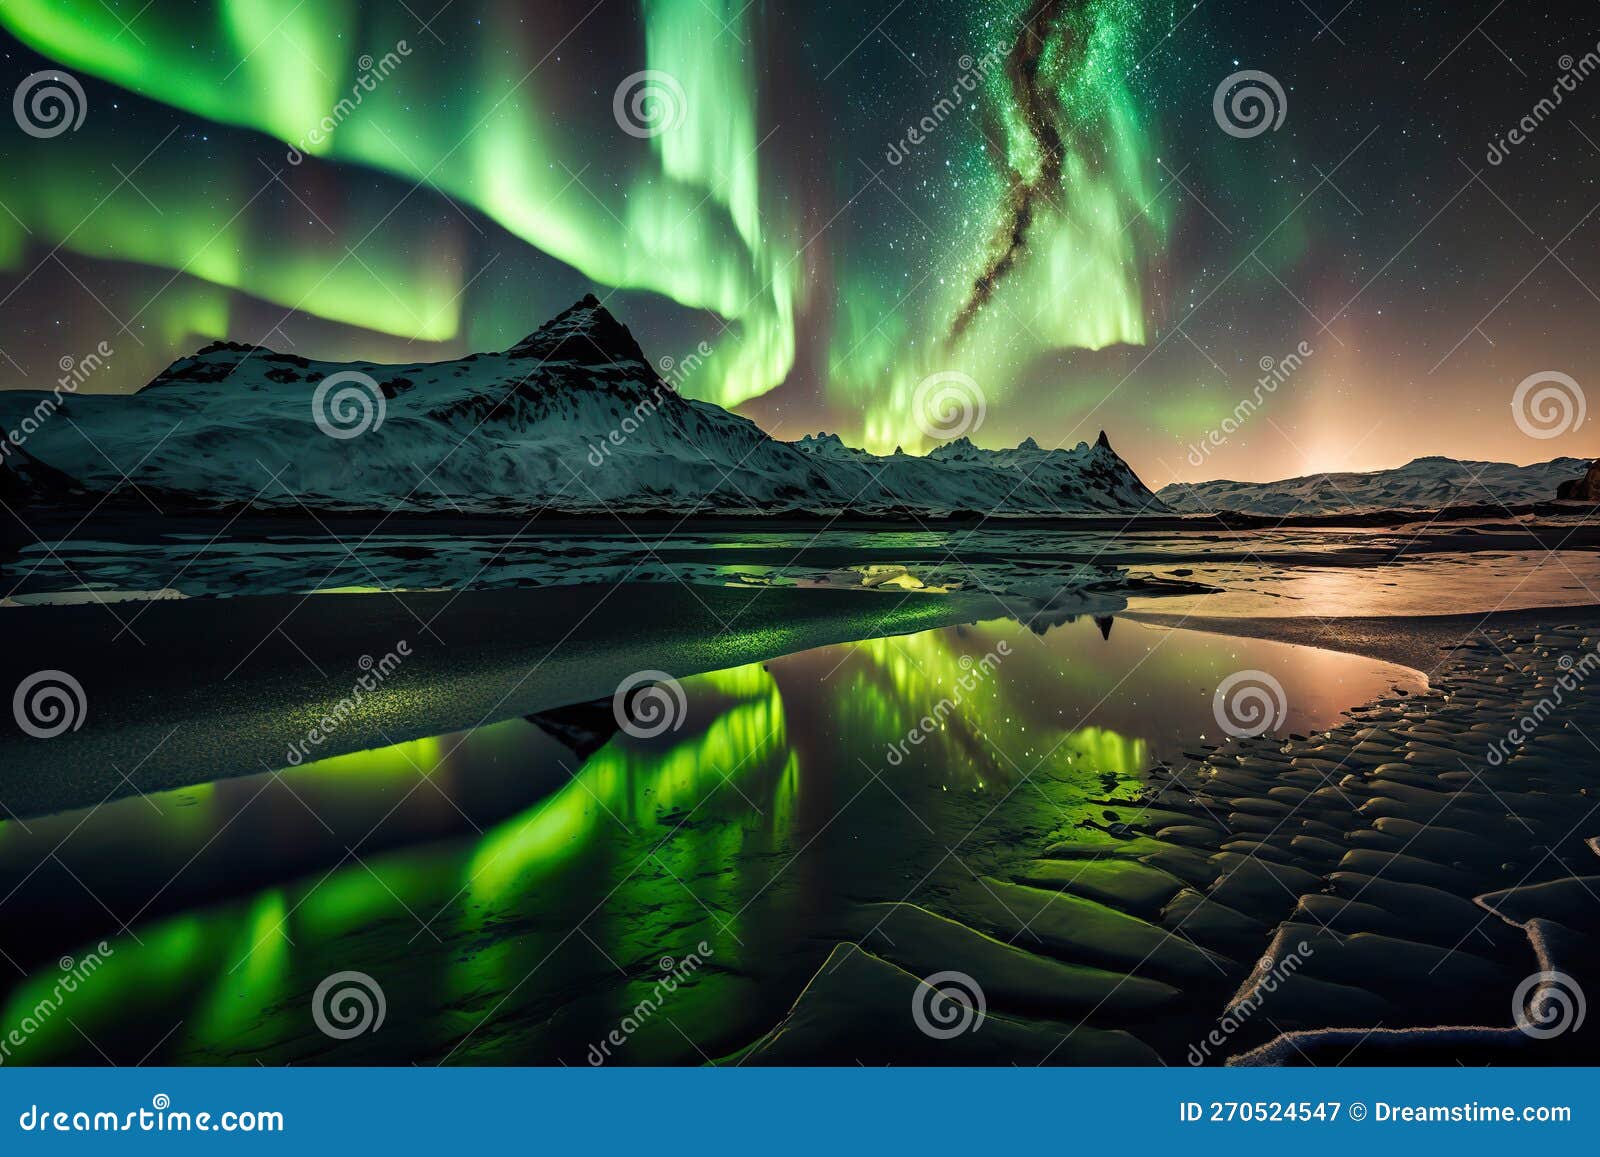 https://thumbs.dreamstime.com/z/beautiful-northern-lights-landscape-aurora-borealis-above-mountains-reflected-sea-270524547.jpg